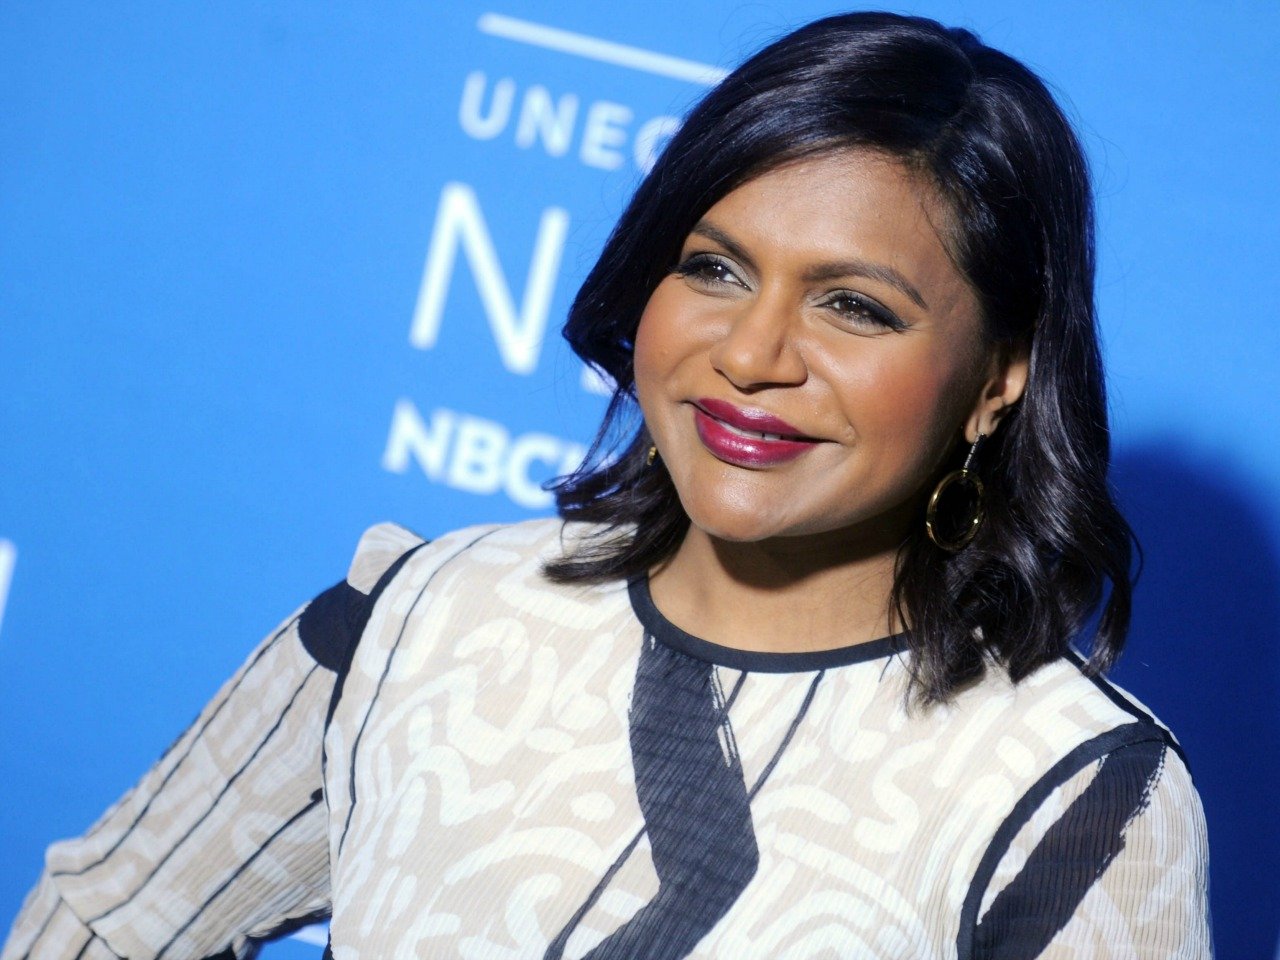 Mindy Kaling is pregnant and the internet is in a tizzy. Why do we care?